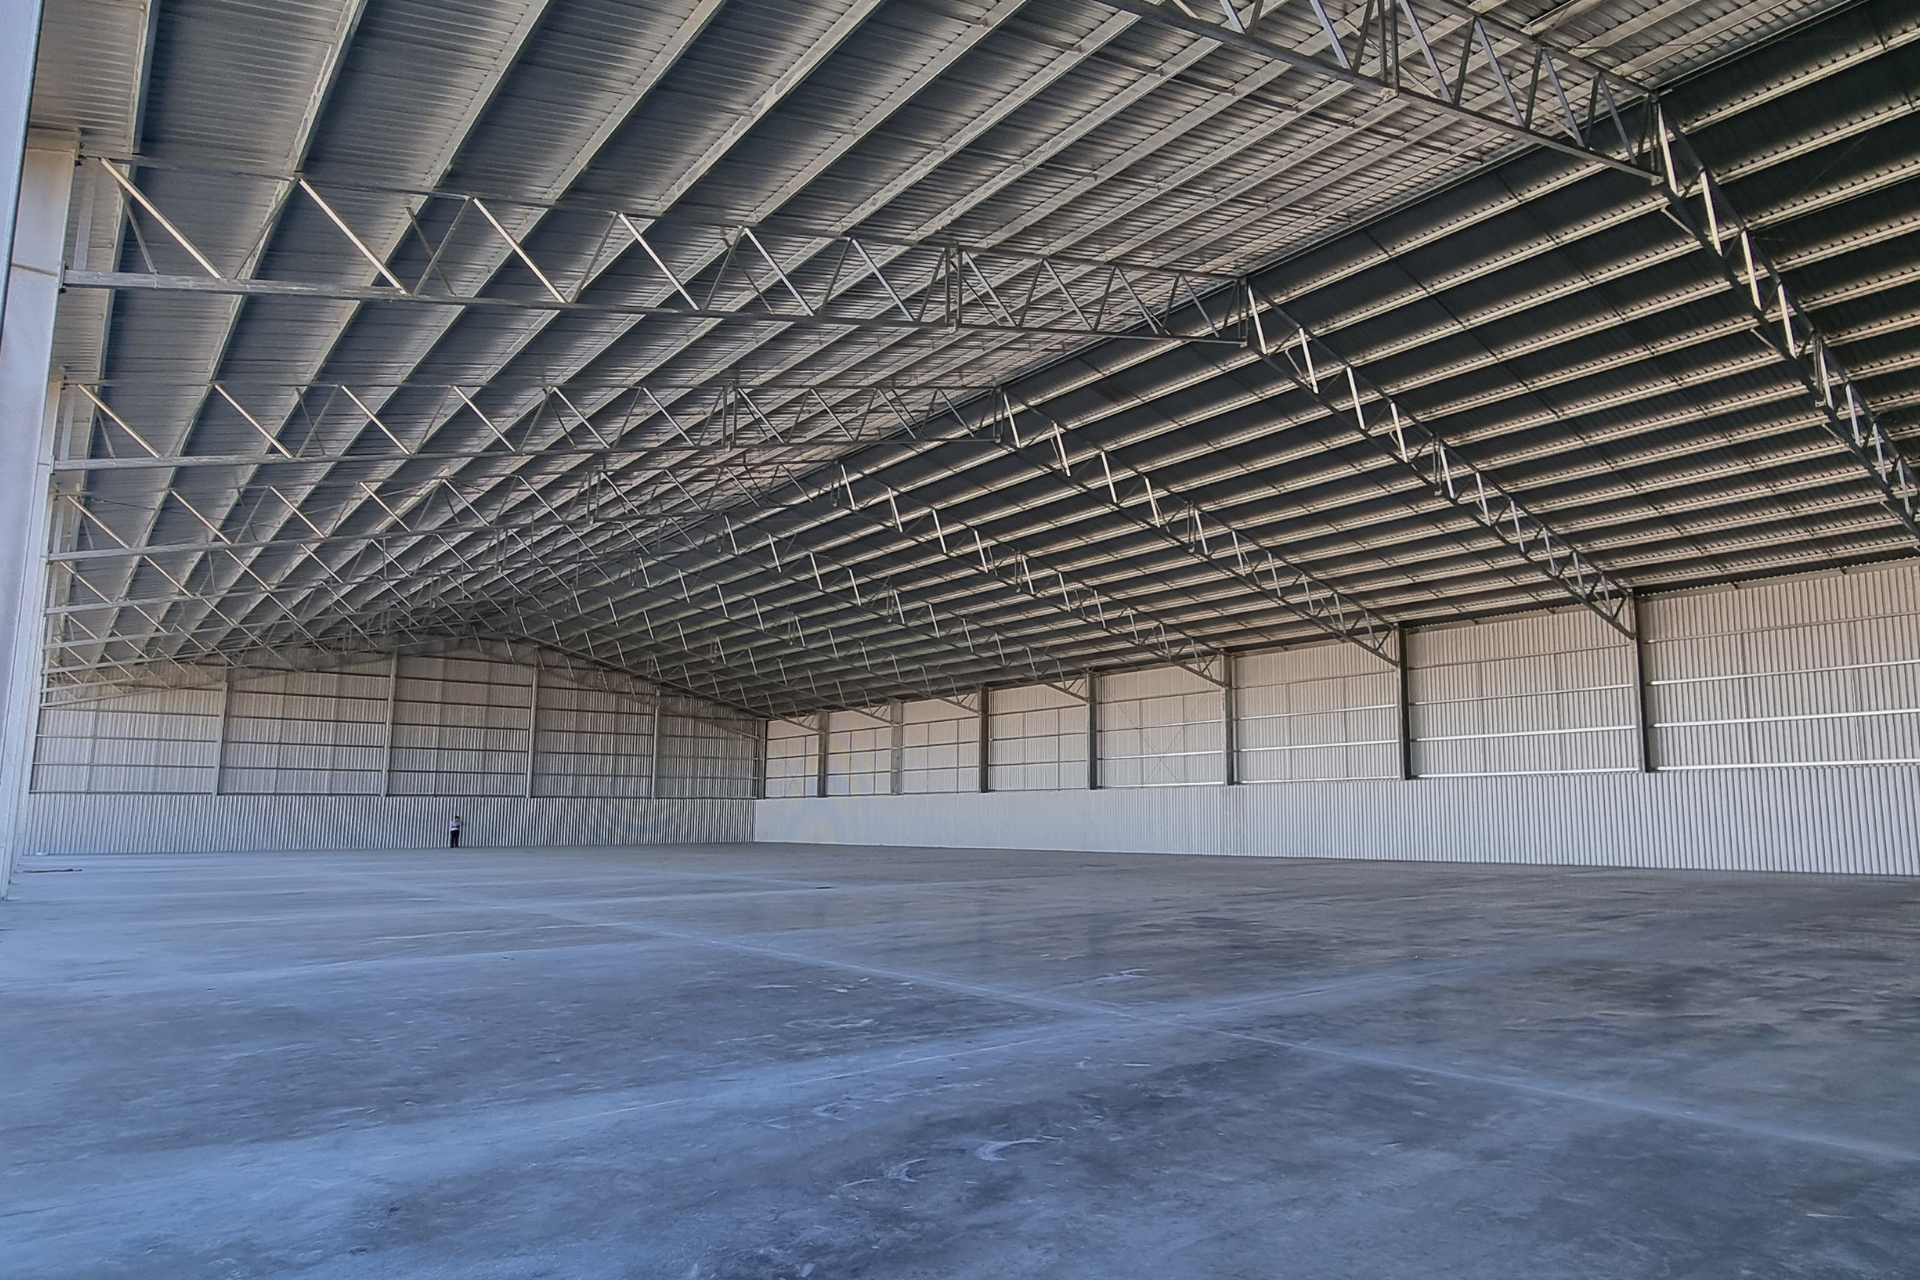 You are currently viewing 81m x 40m x 9m grain shed